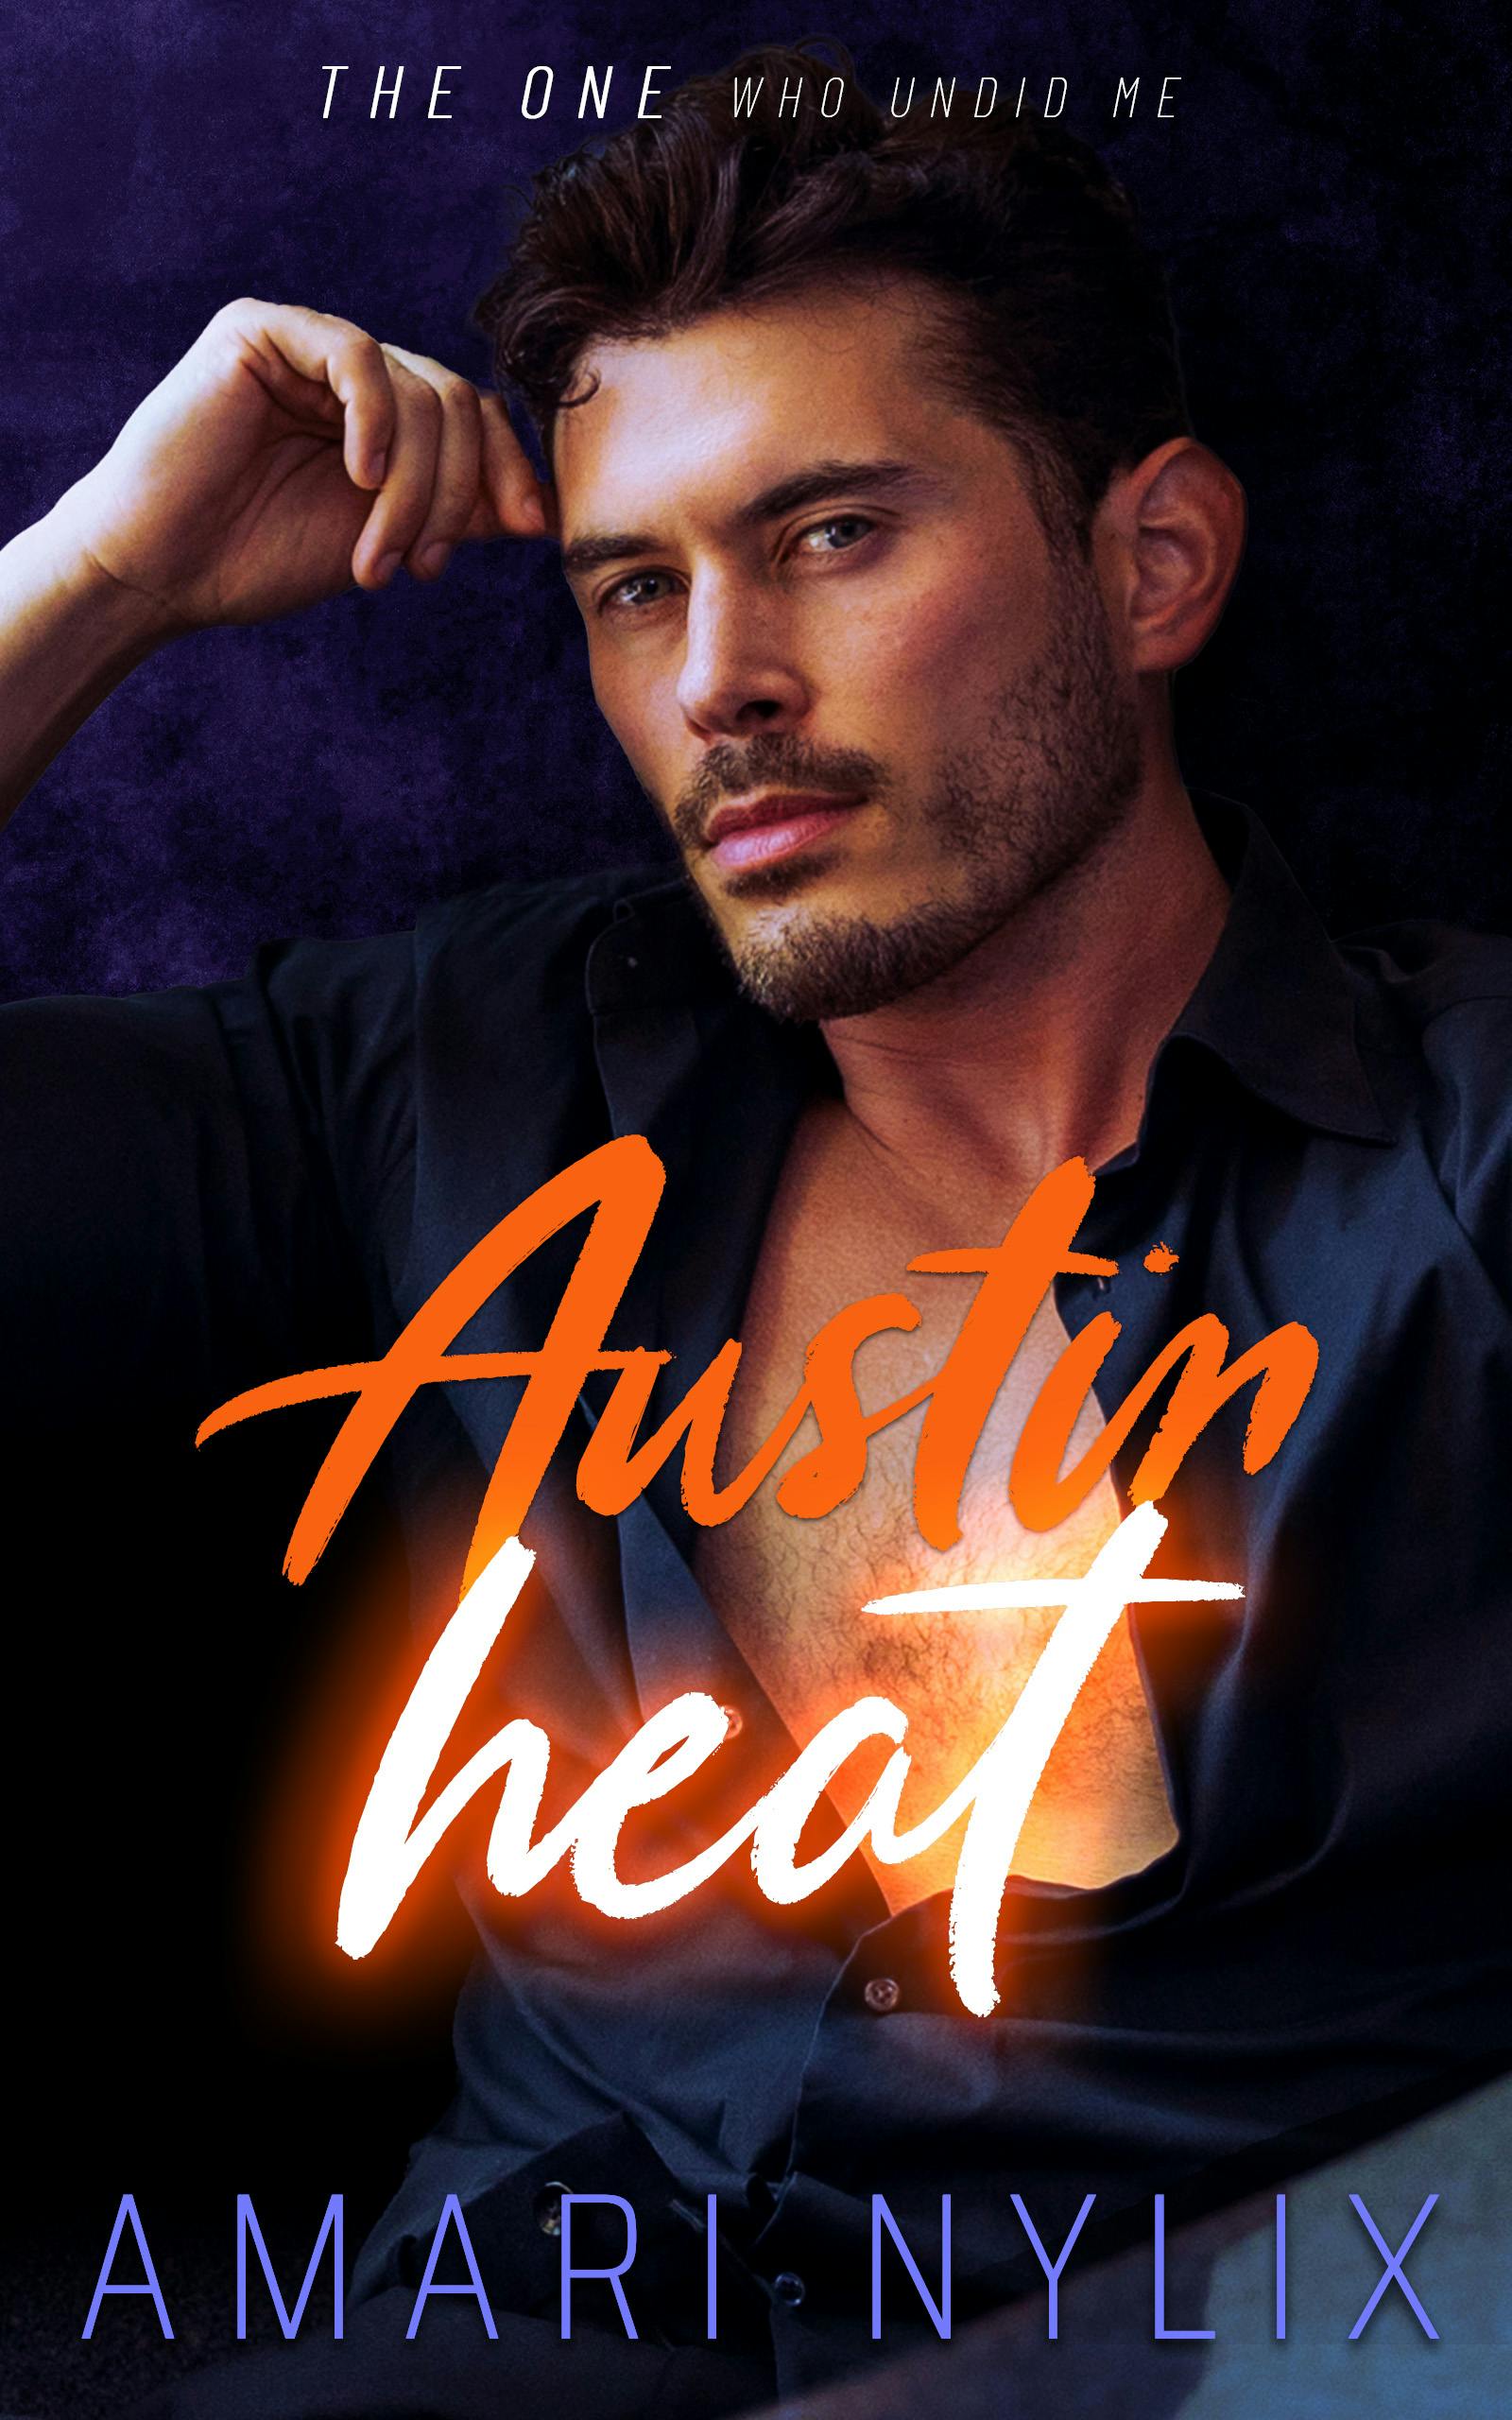 Cover image for book one. Man with hand to his head behind orange letters that read Austin Heat